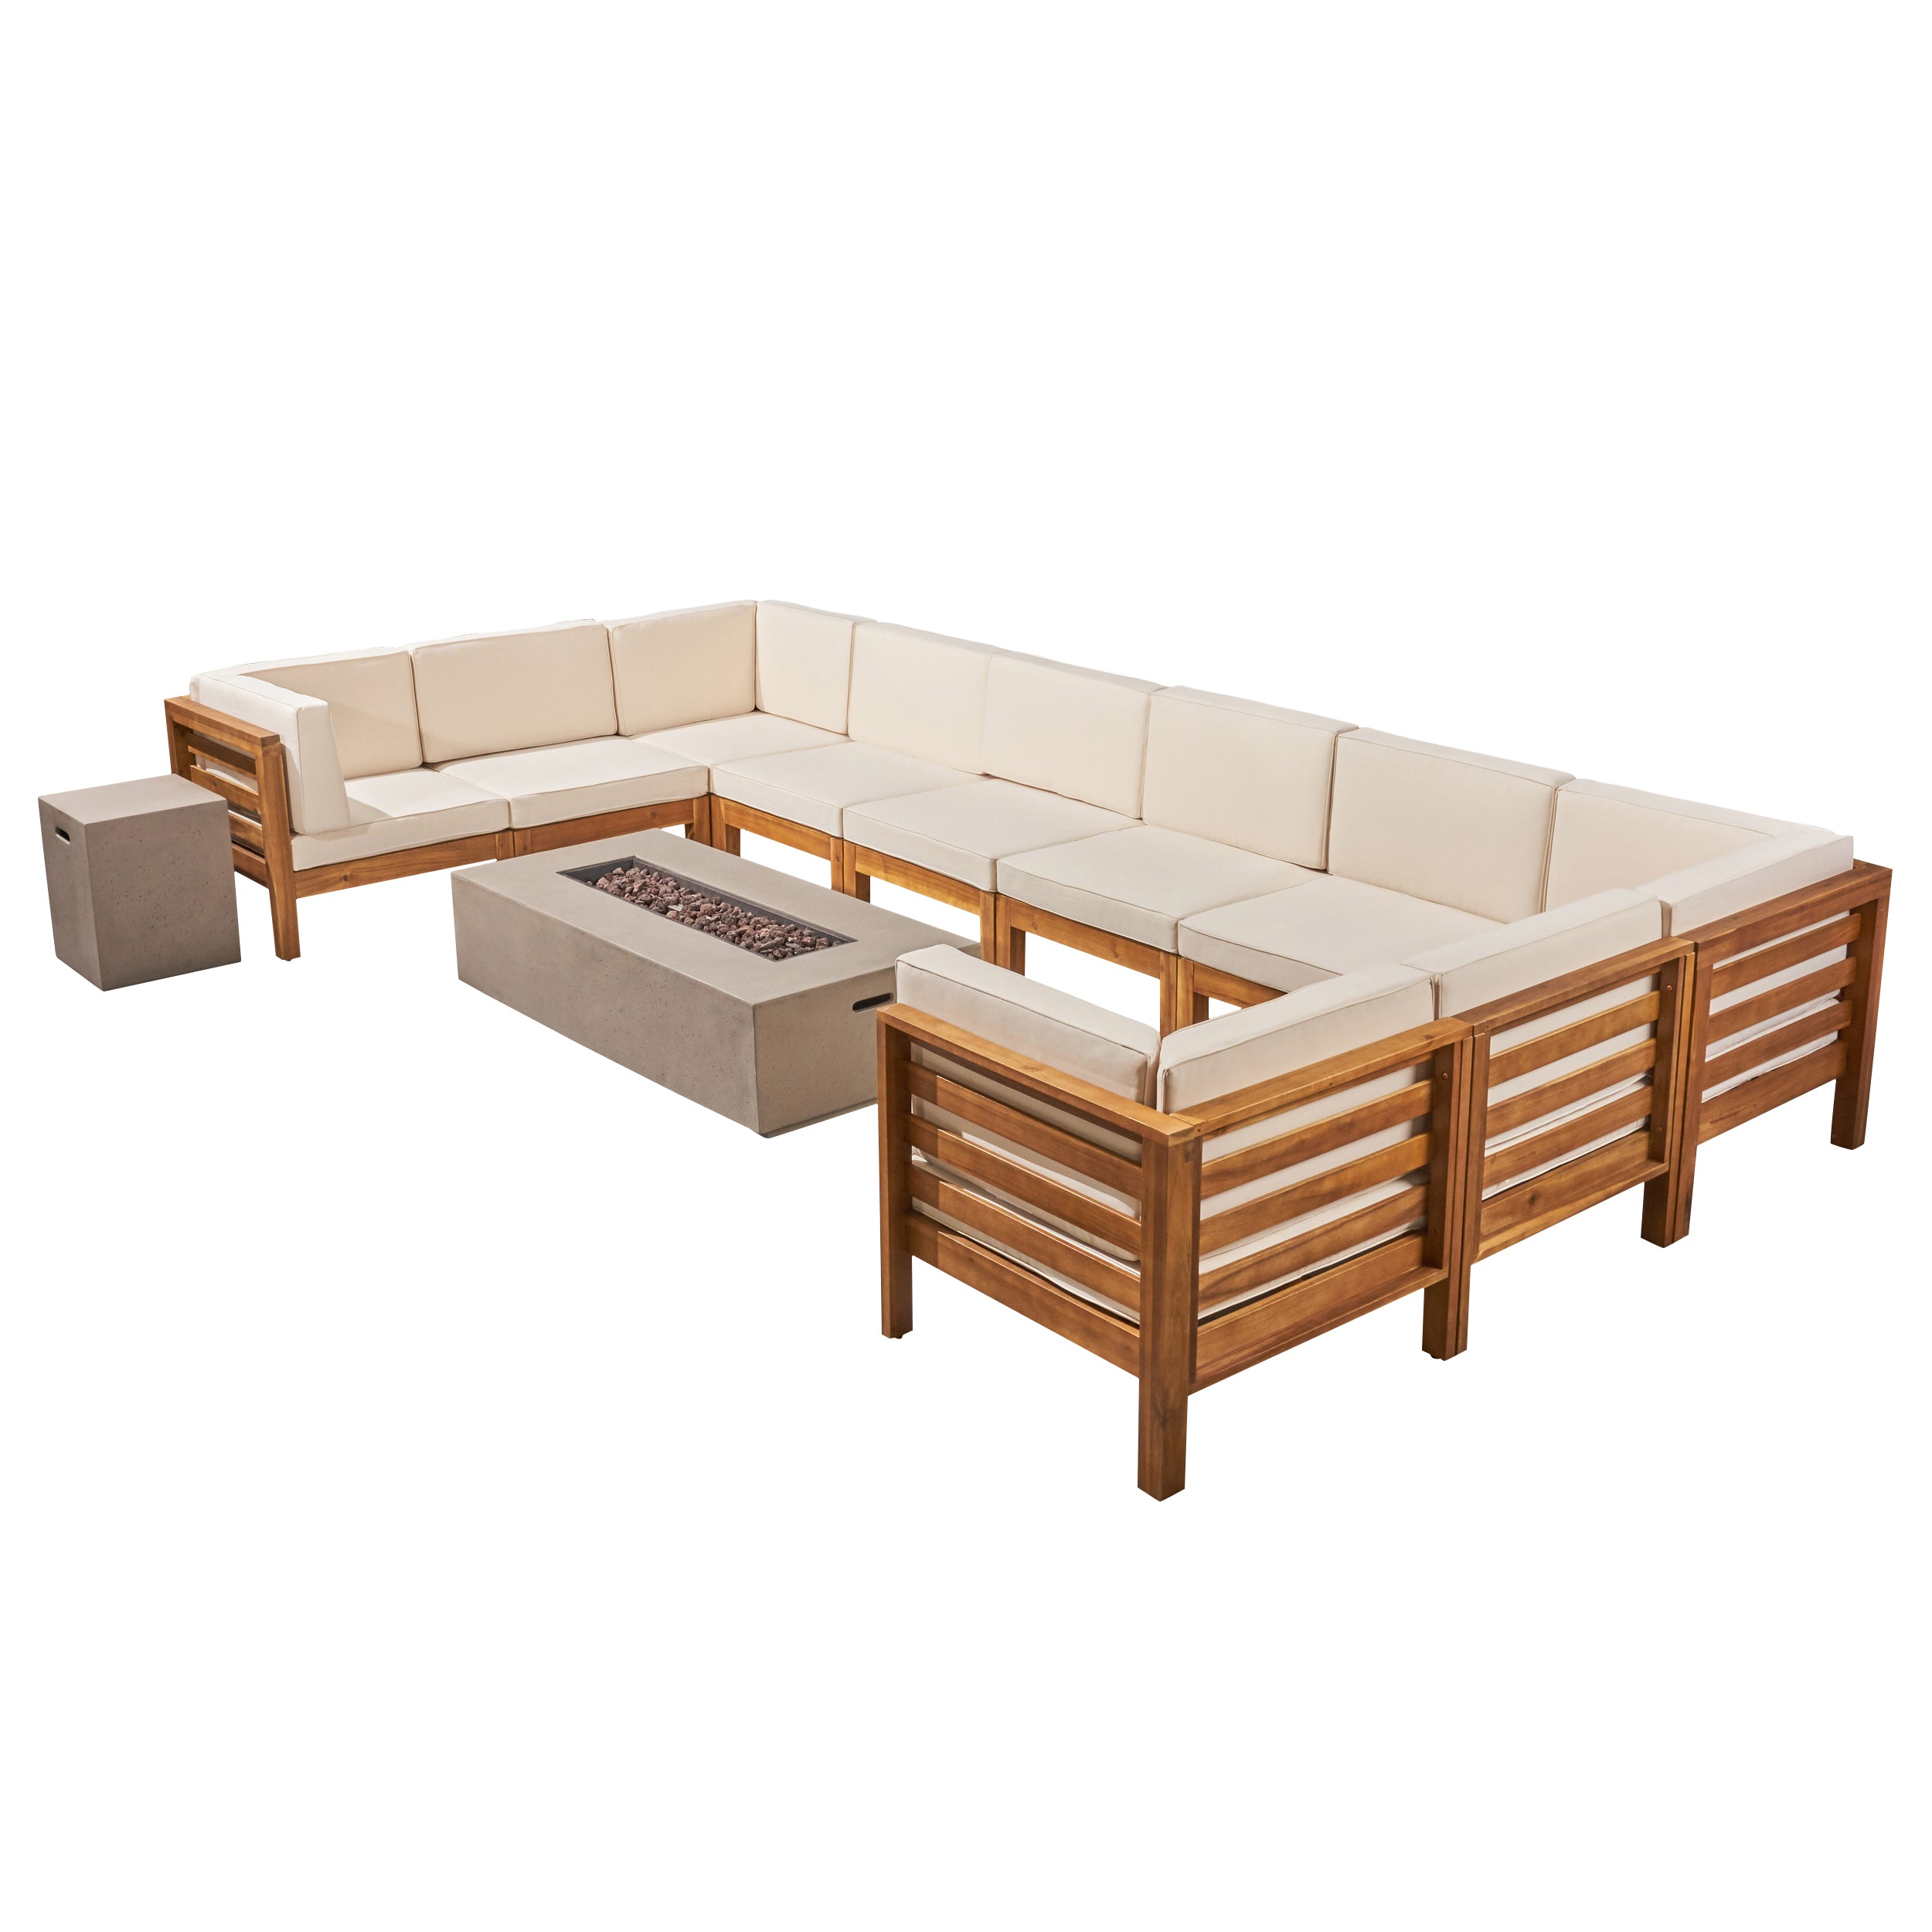 Ravello Outdoor 12 Piece U Shaped Sectional Sofa Set with Fire Pit